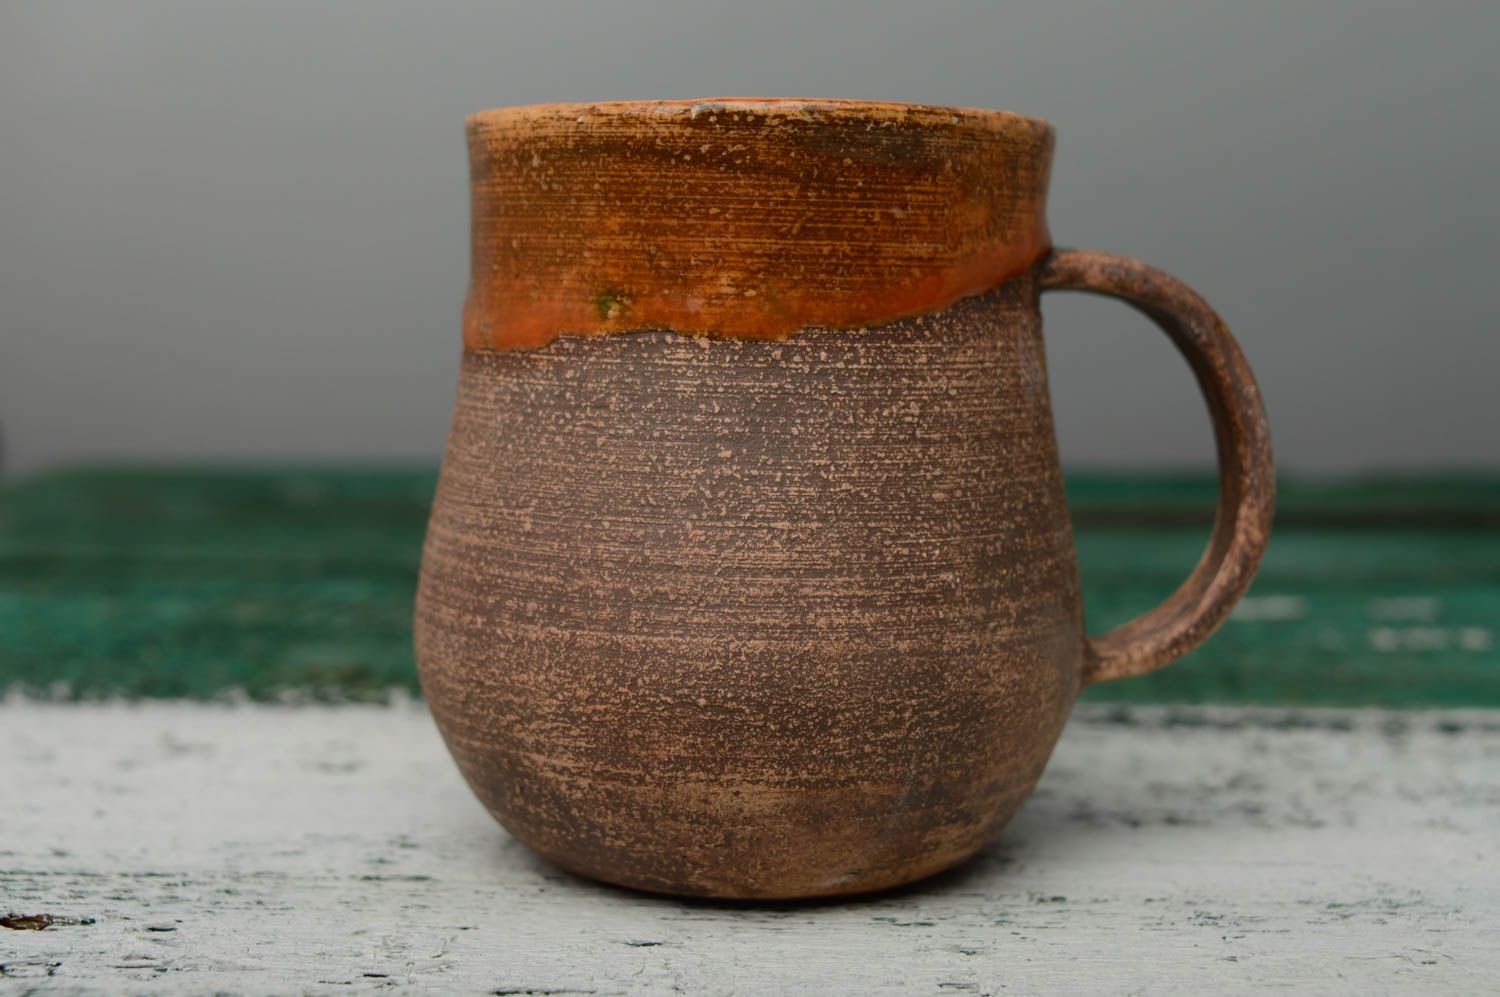 10 oz handmade rustic style design light brown and orange color clay cup with handle, glazed inside photo 5